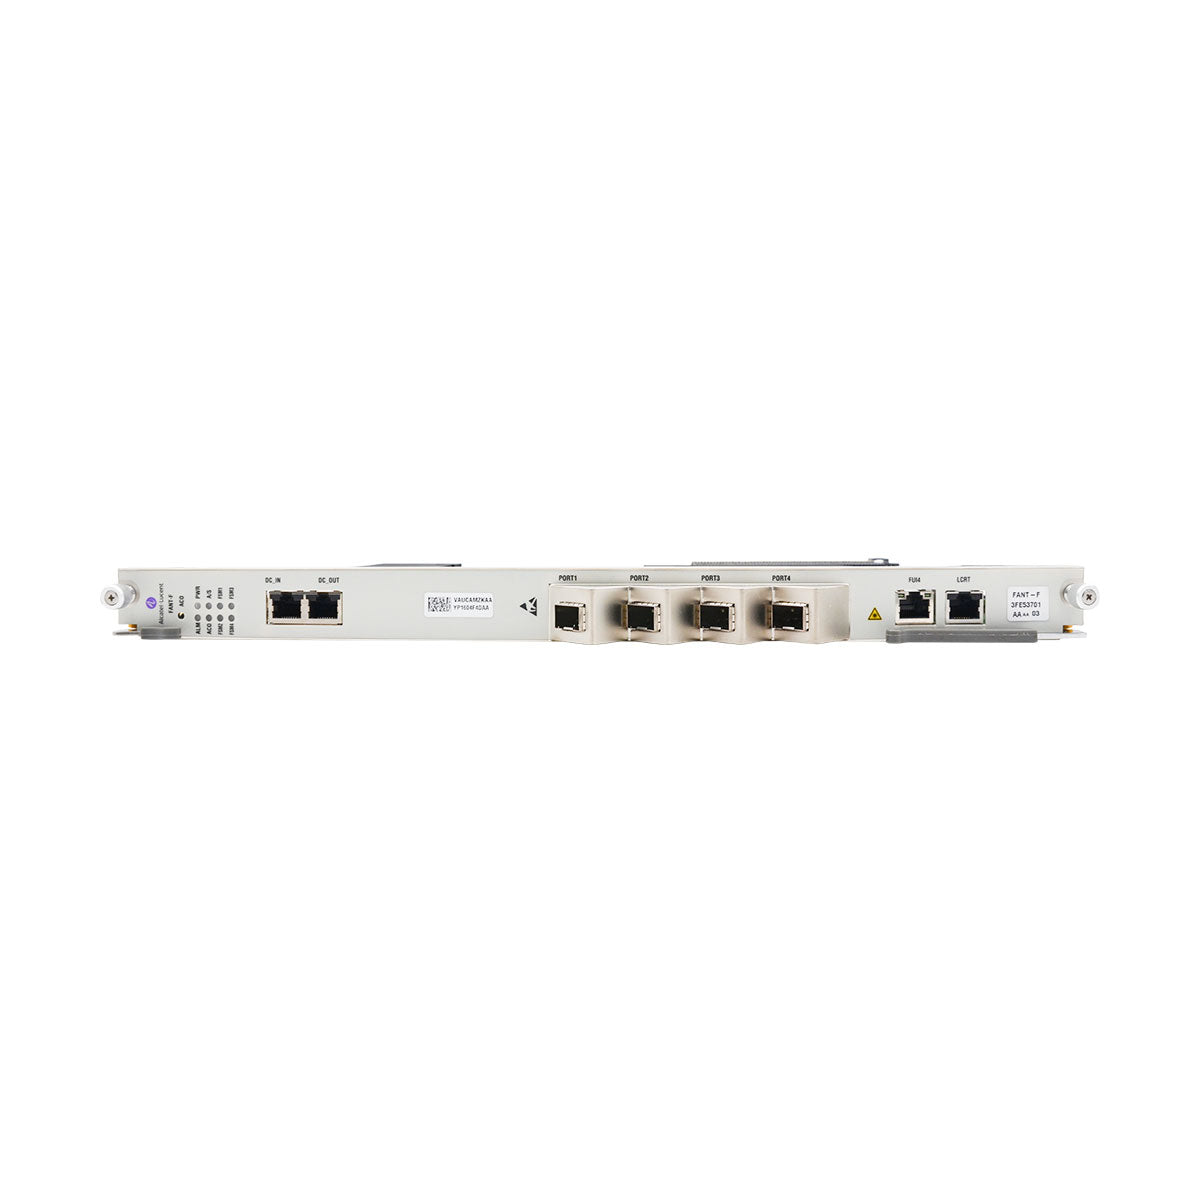 Nokia FANT-F(AAAA) Main Control Board for Nokia Alcatel-Lucent 7360 ISAM FX series OLT